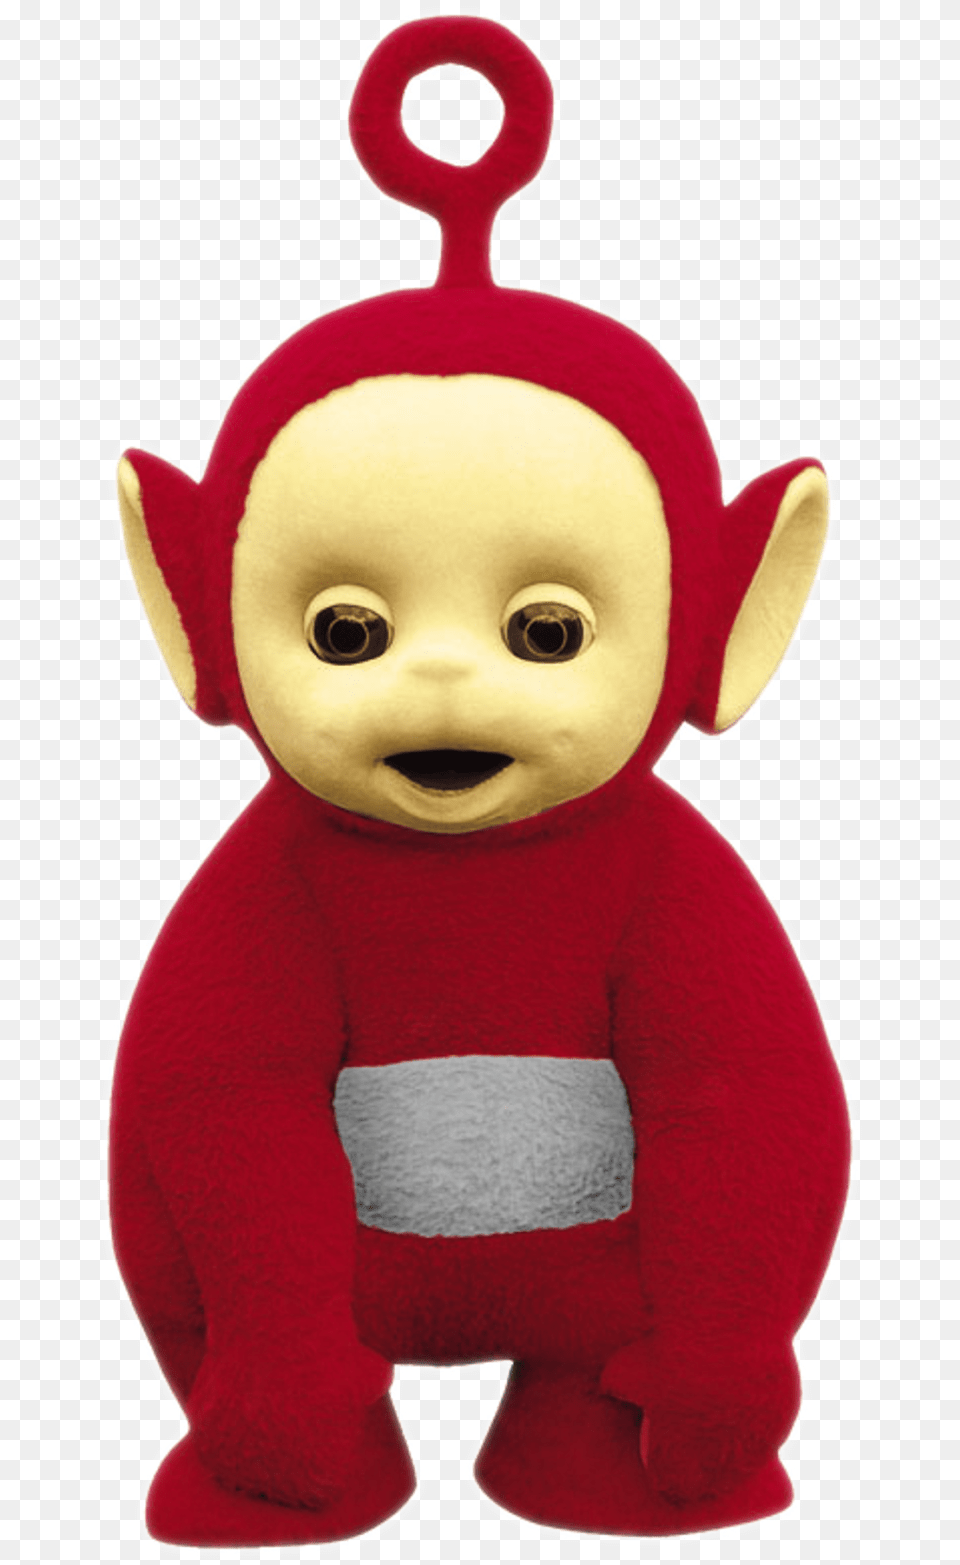 Teletubbies Teletubbies Po On Teletubbies, Plush, Toy, Face, Head Free Png Download